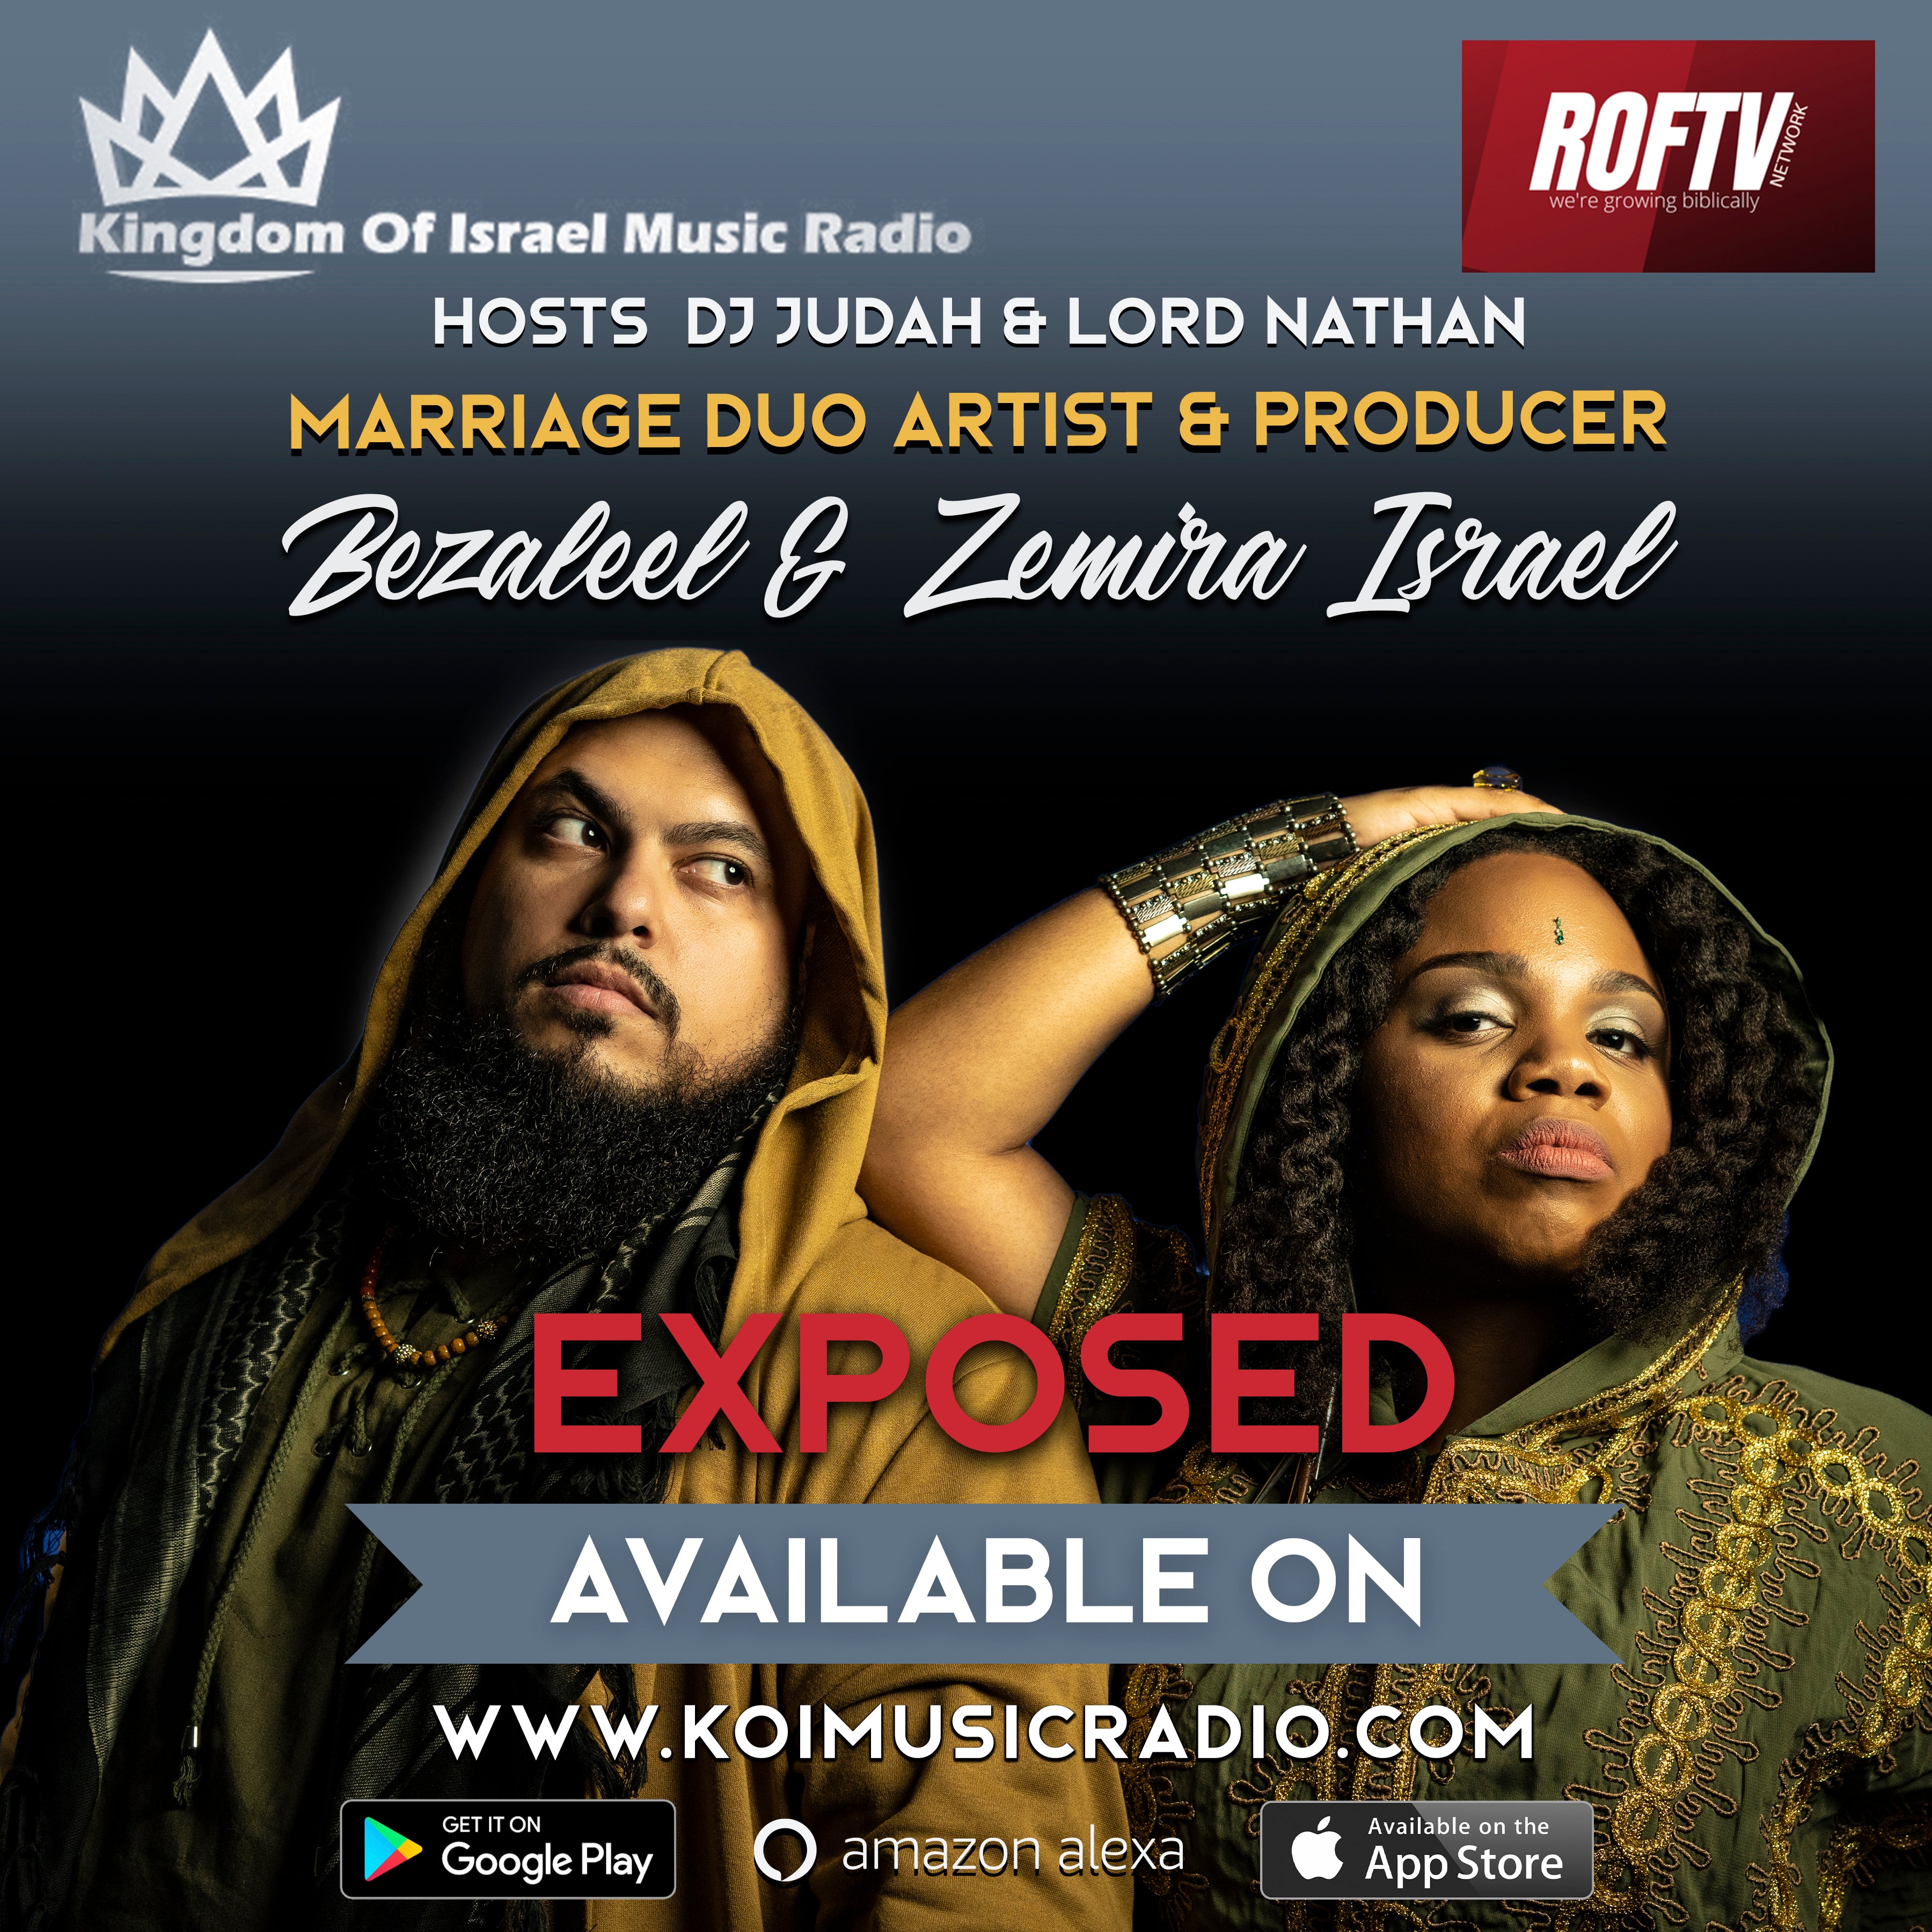 Zemira Israel Interview with the Kingdom of Israel Music Radio